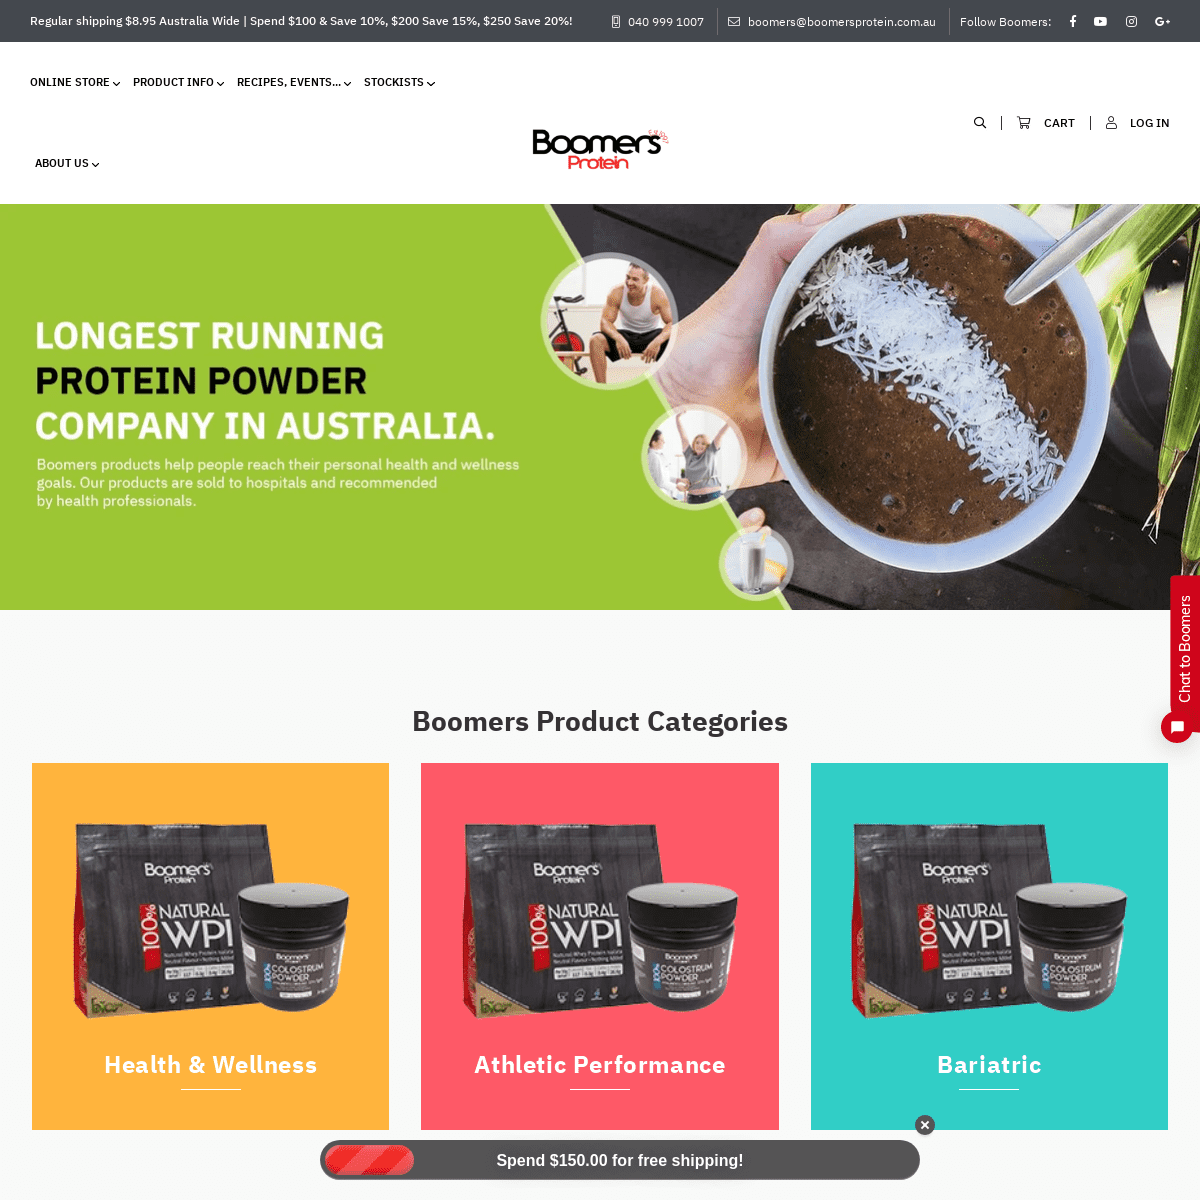 A complete backup of wheyprotein.com.au